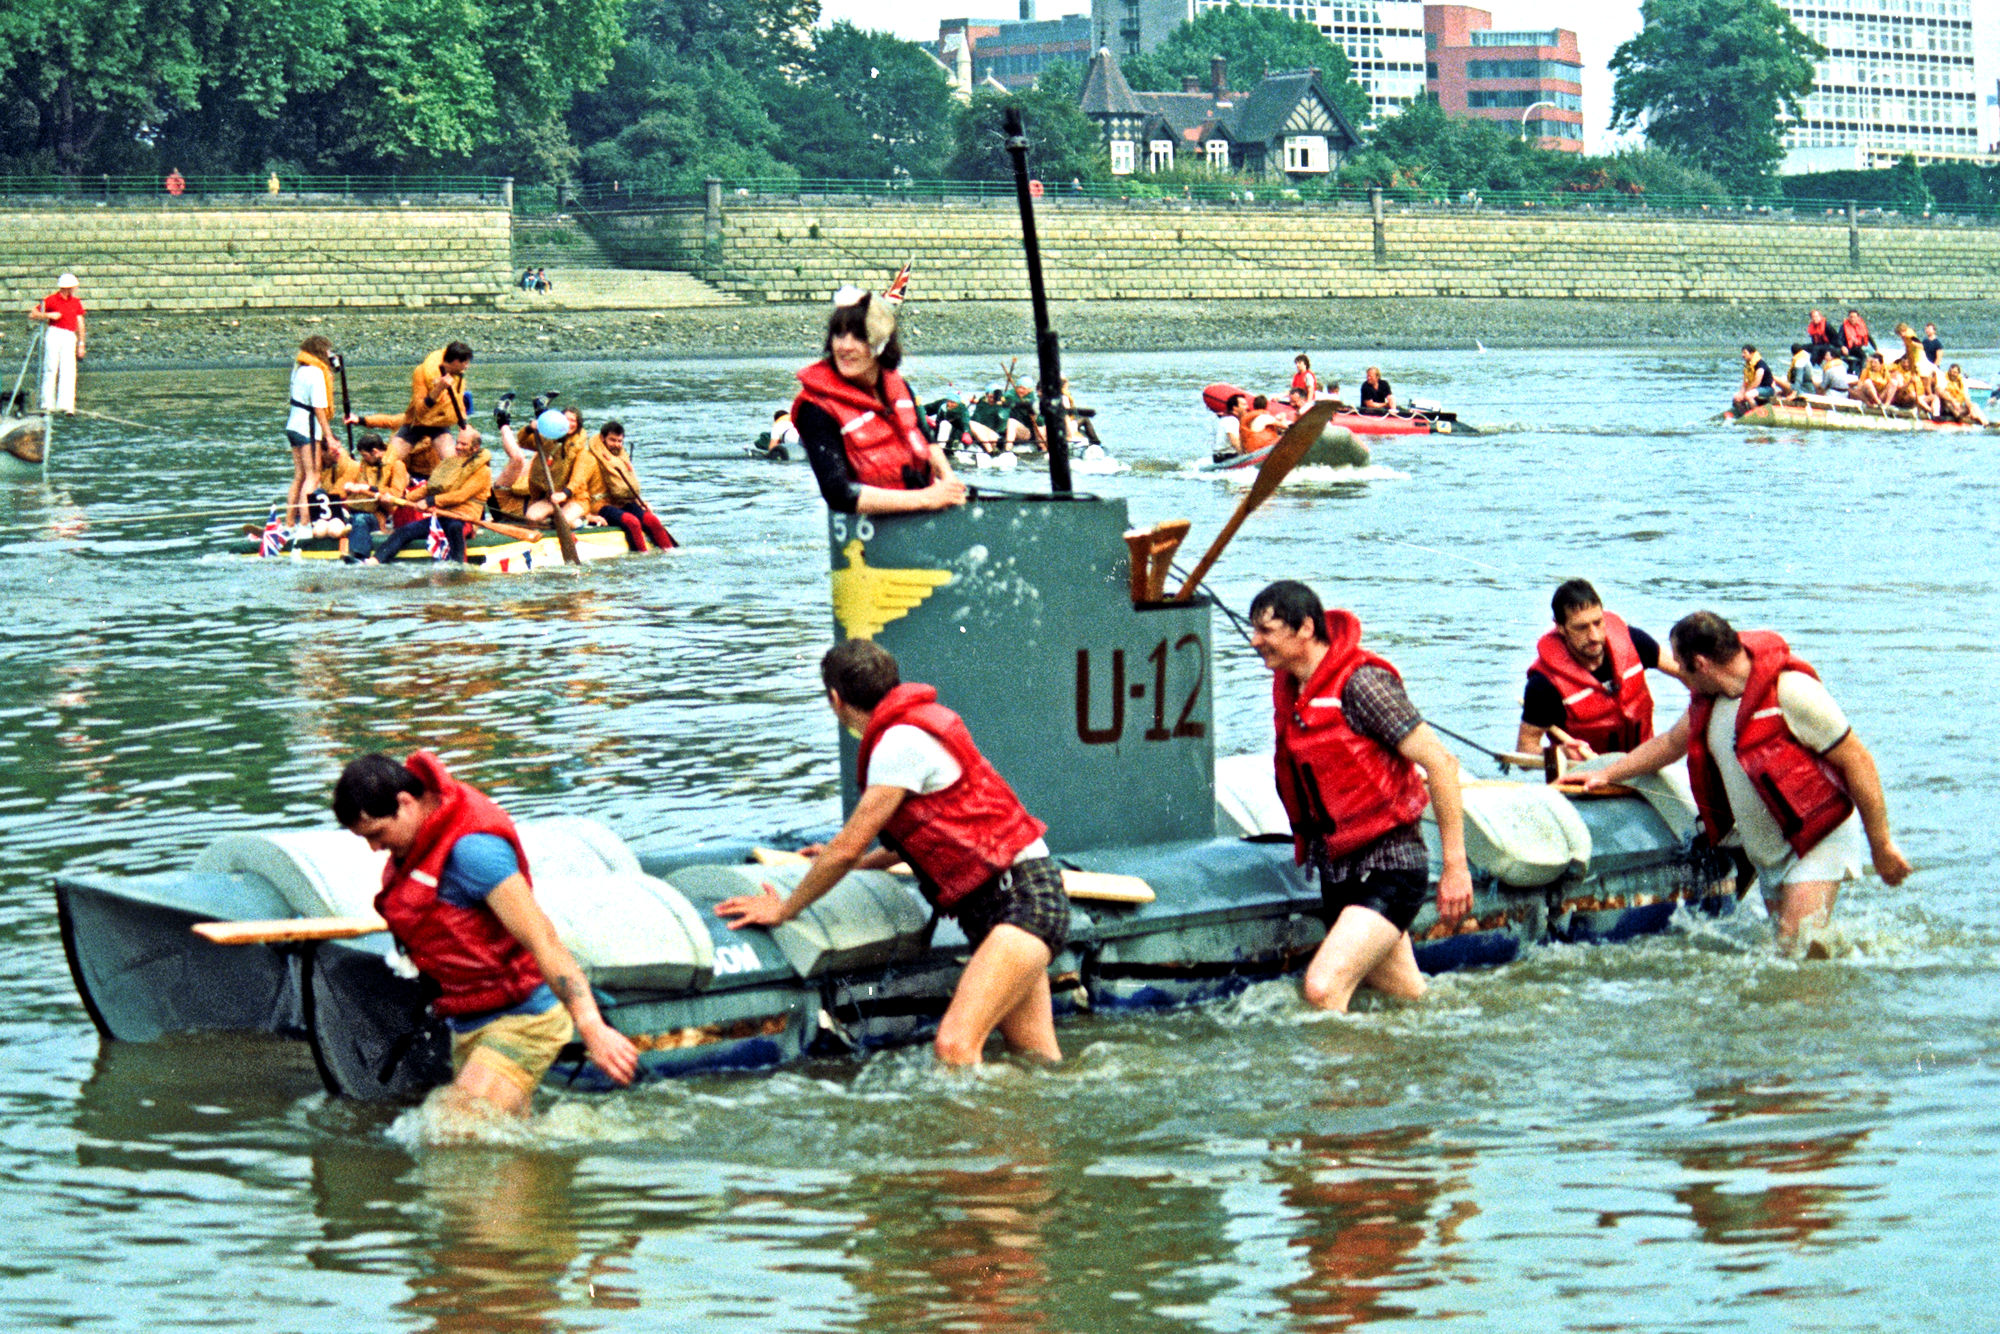 Met Police Raft Race, to raise money for the Falklands Fund.